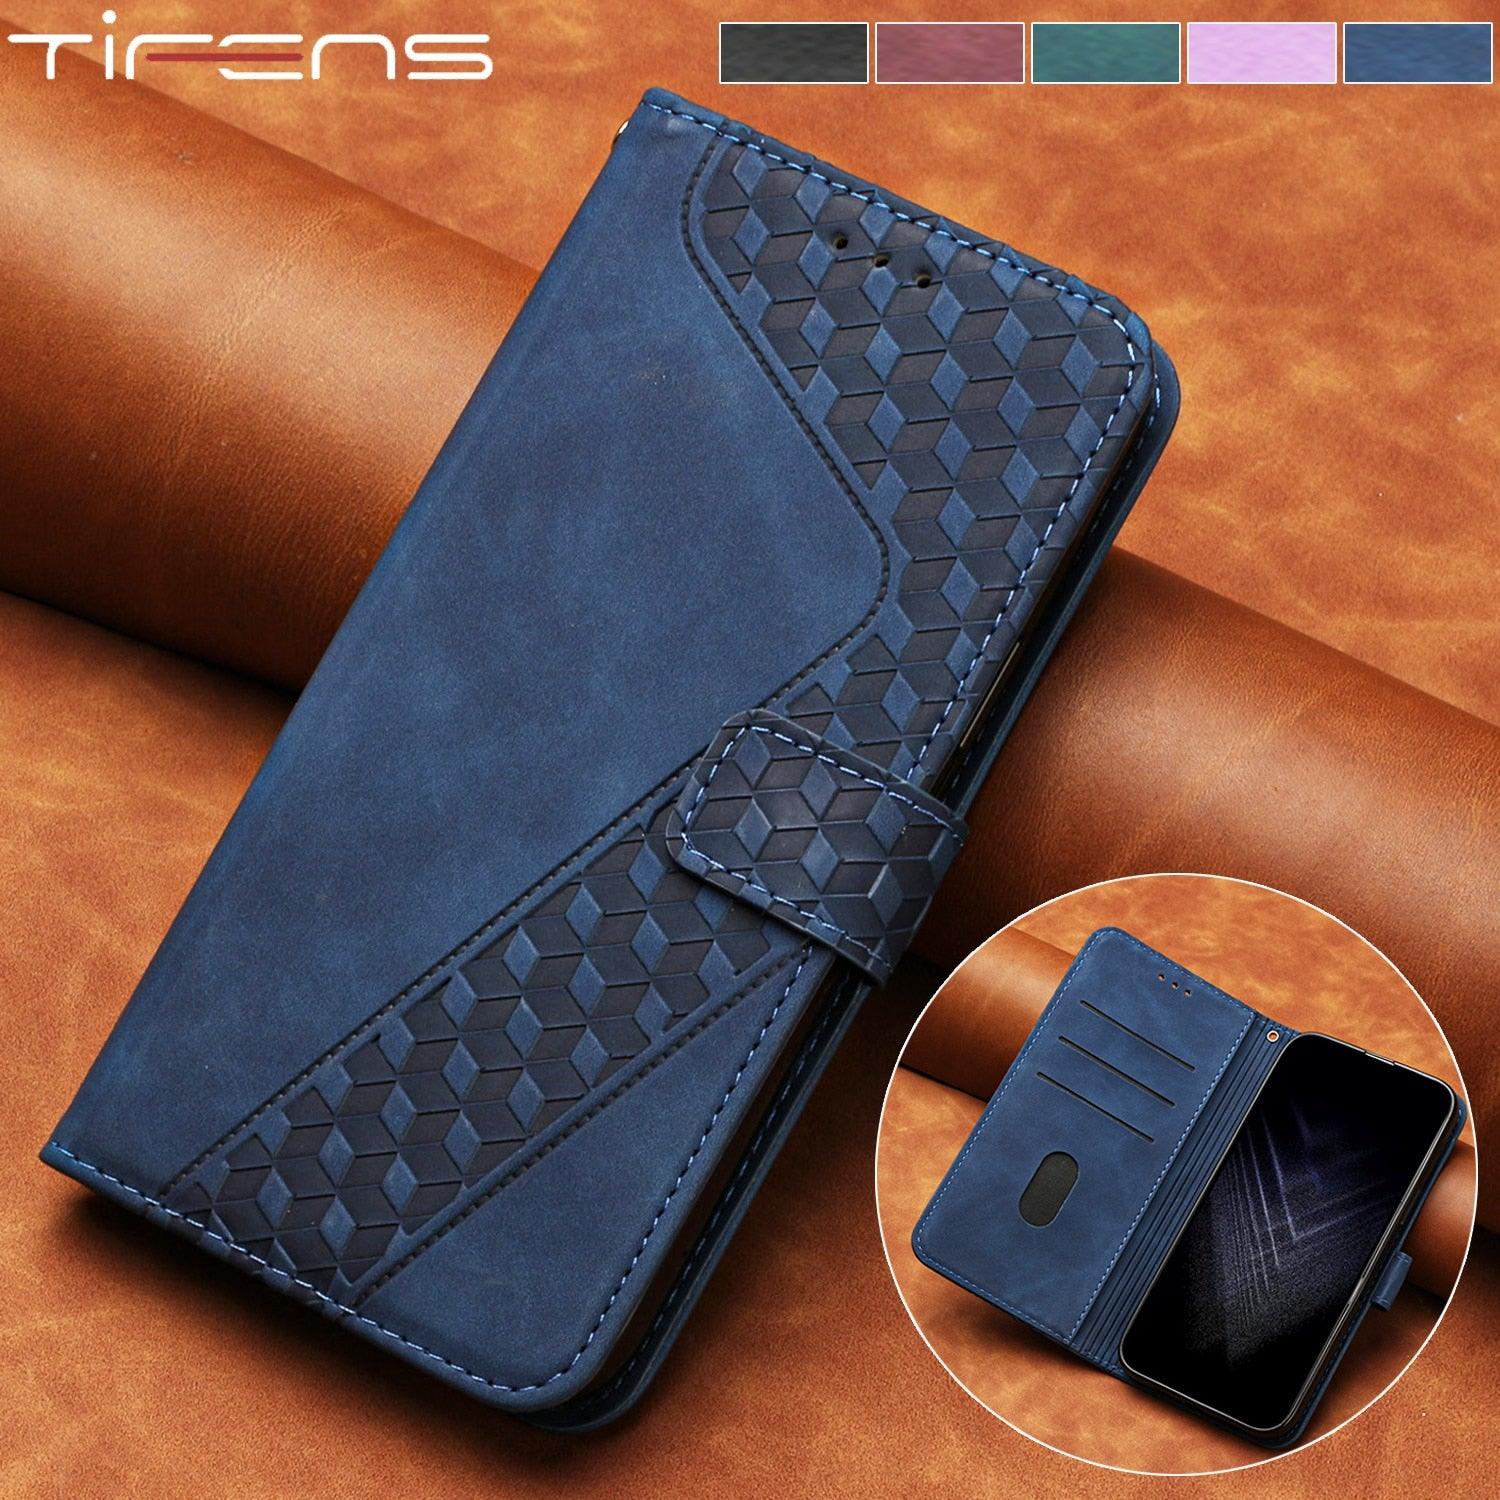 Leather Phone Bag Case For Samsung Galaxy S23 S22 S21 S20 FE Ultra S10 S9 S8 Plus S7 Edge Flip Wallet Card Slot Shockproof Cover